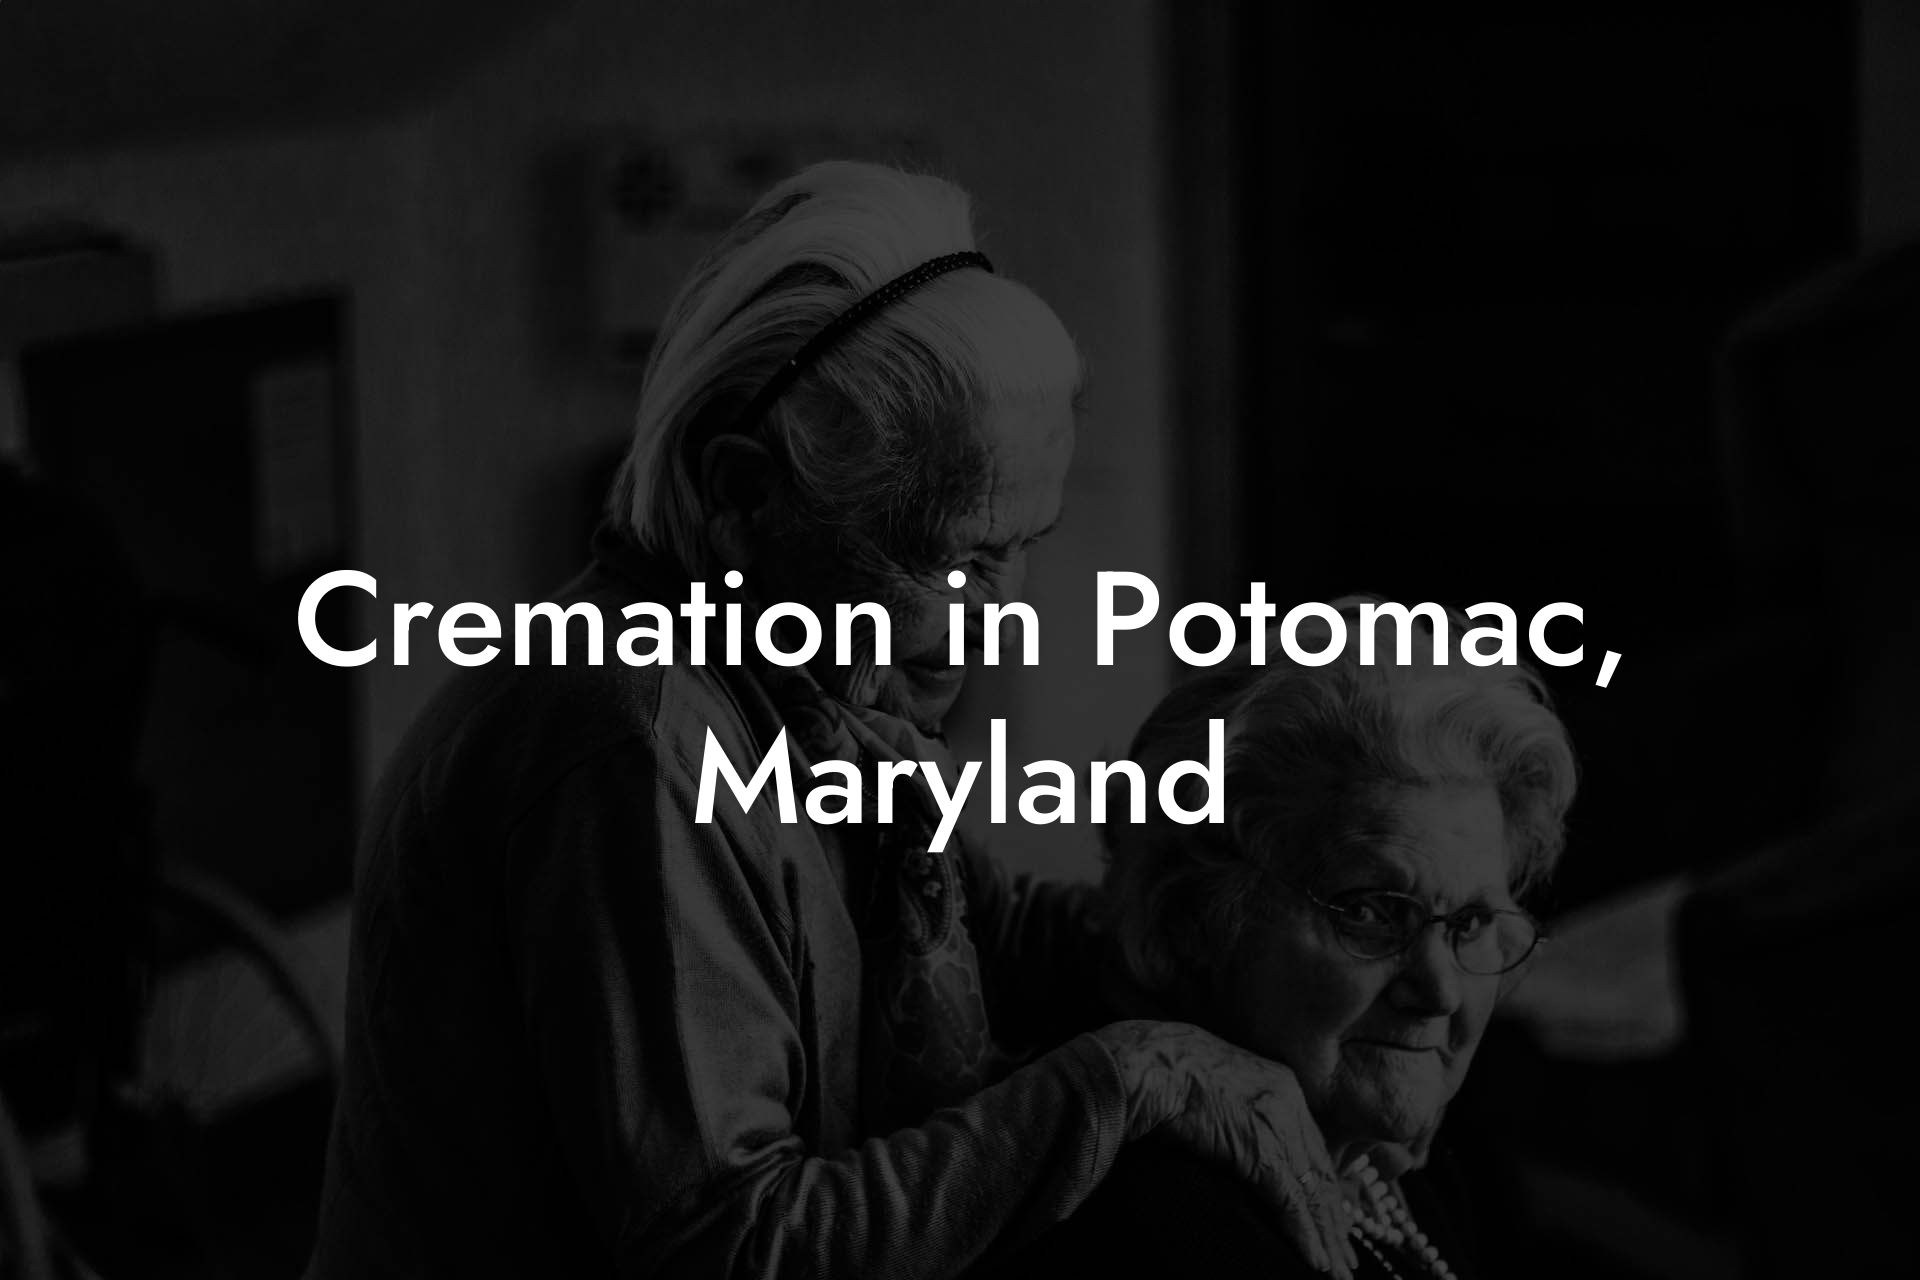 Cremation in Potomac, Maryland